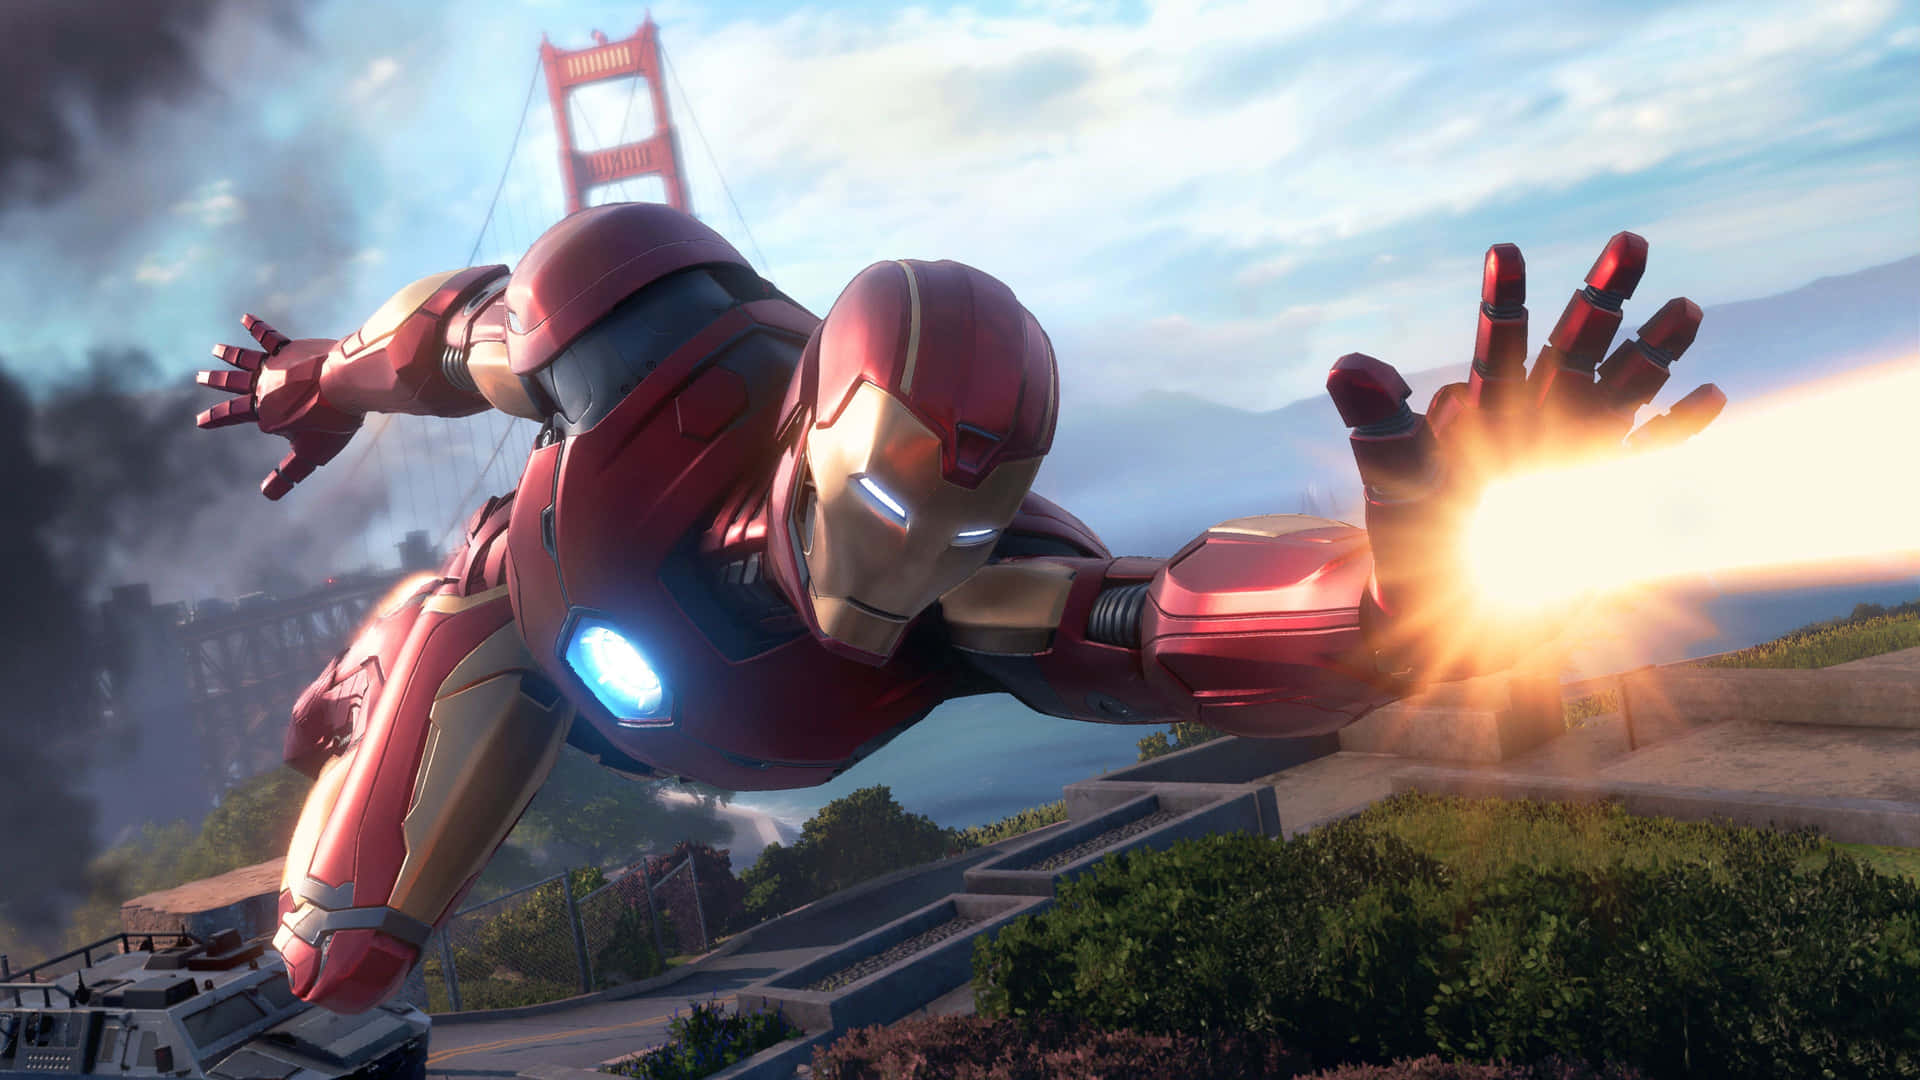 Tony Stark's alter-ego Iron Man flying high, prepared to take on any challenge at hand. Wallpaper